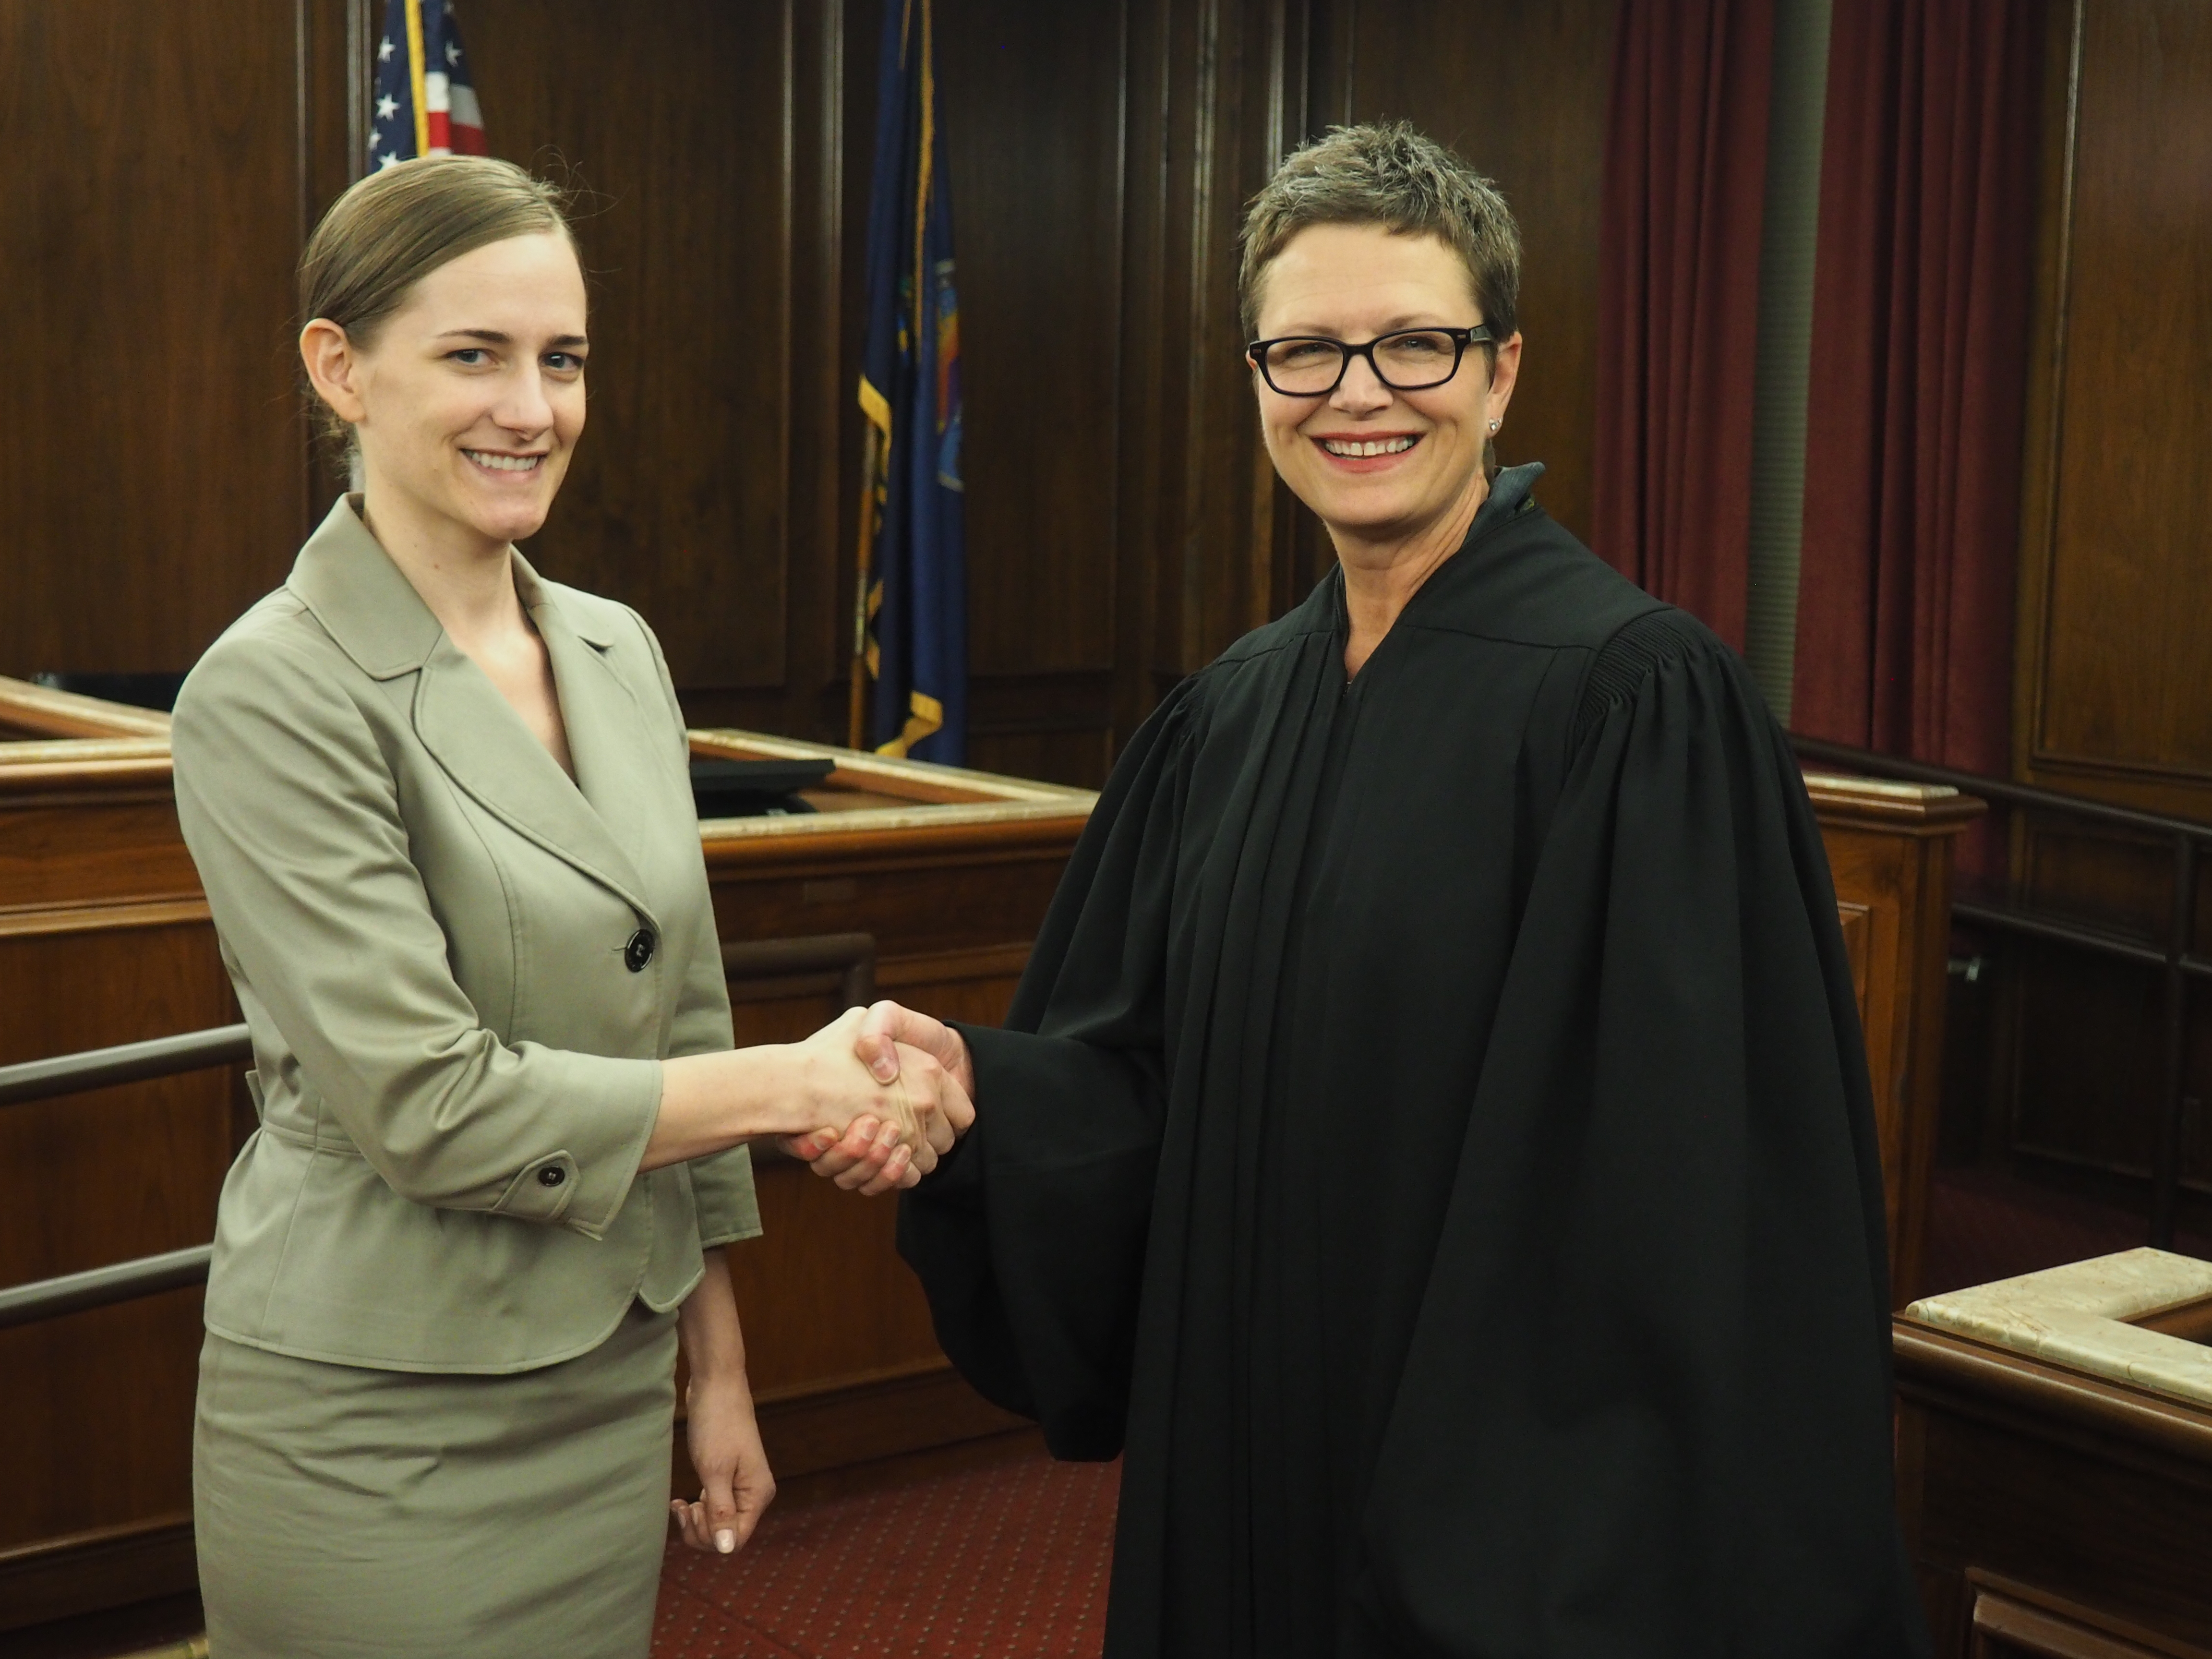 Photograph: Gillian Chadwick and Justice Carol Beier